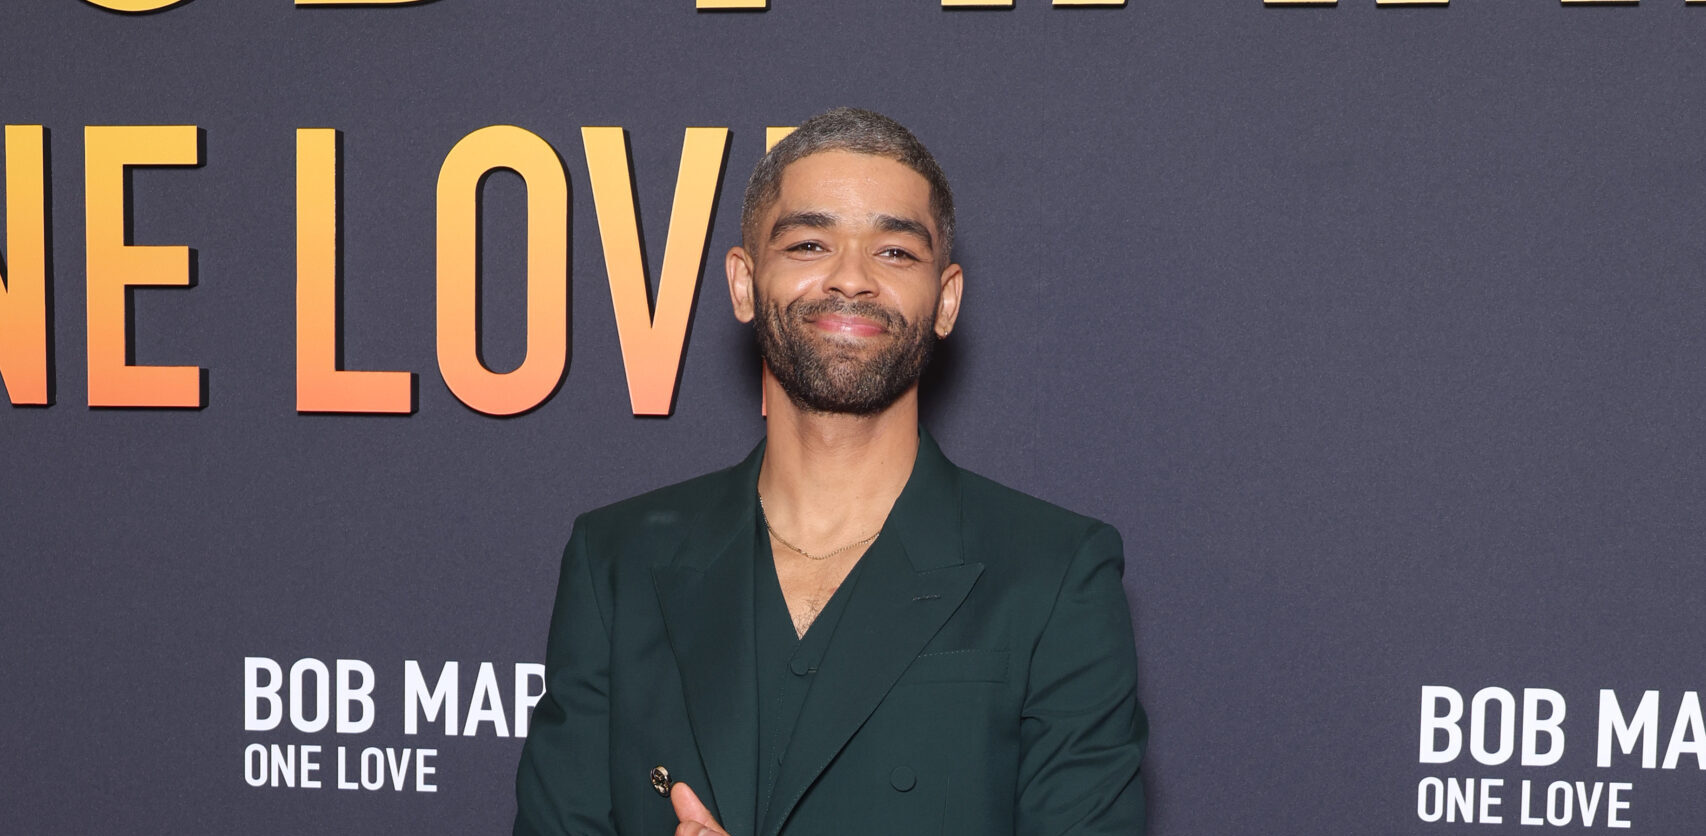 Kingsley Ben-Adir in a bespoke Gucci suit at the Paris premiere of "Bob Marley: One Love."